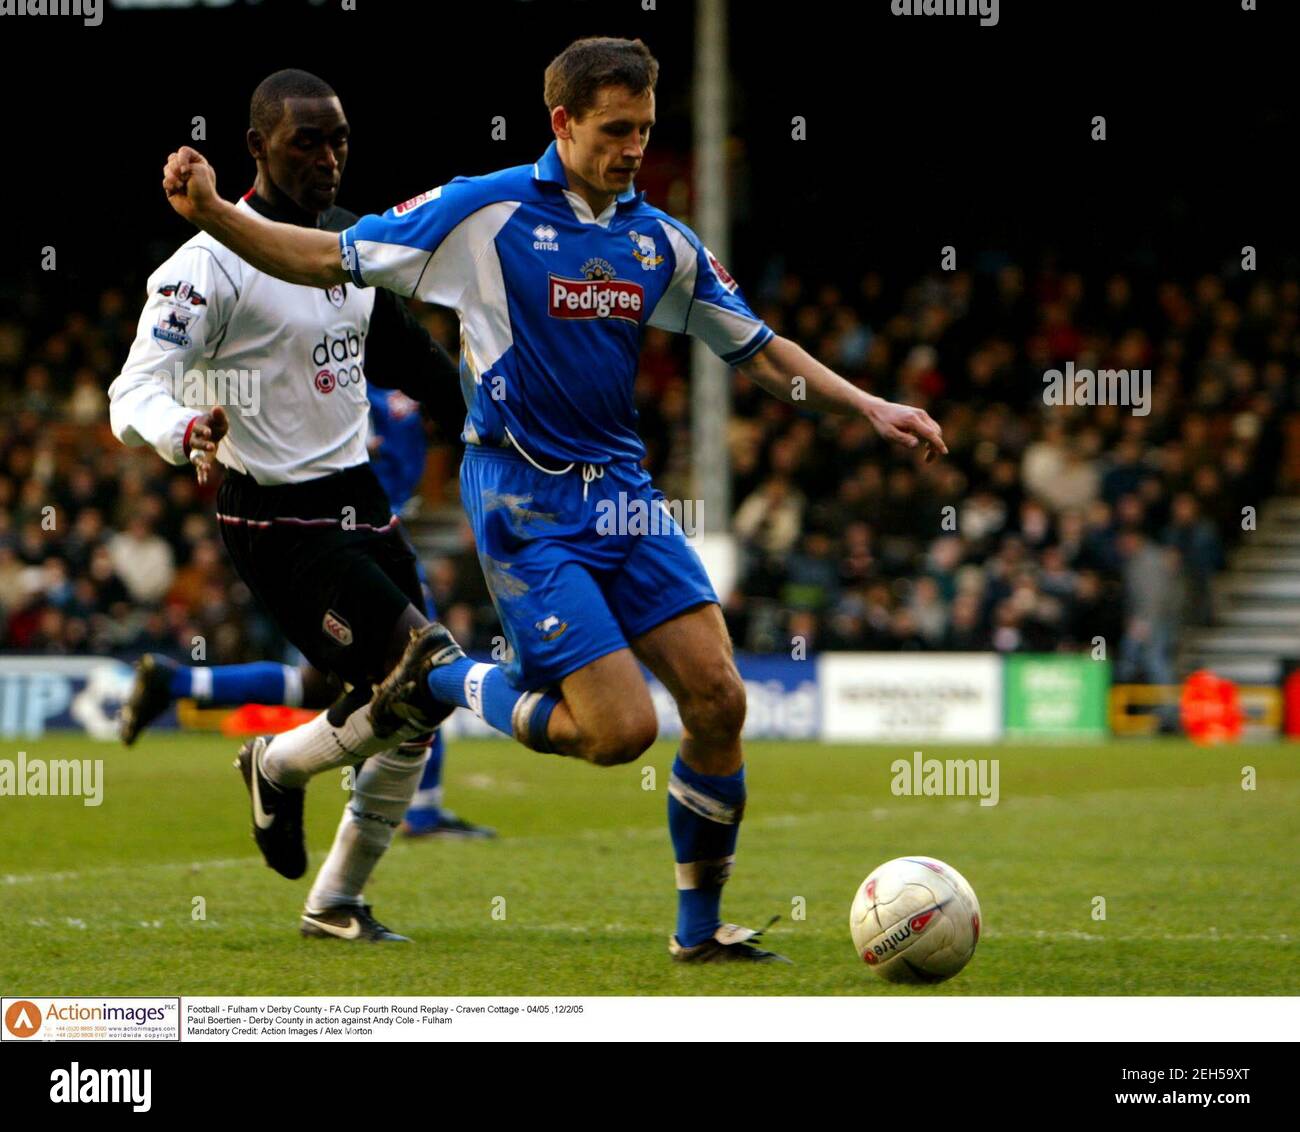 Football Fulham V Derby County Fa Cup Fourth Round Replay Craven Cottage 04 05 12 2 05 Paul Boertien Derby County In Action Against Andrew Cole Fulham Mandatory Credit Action Images Alex Morton Stock Photo Alamy